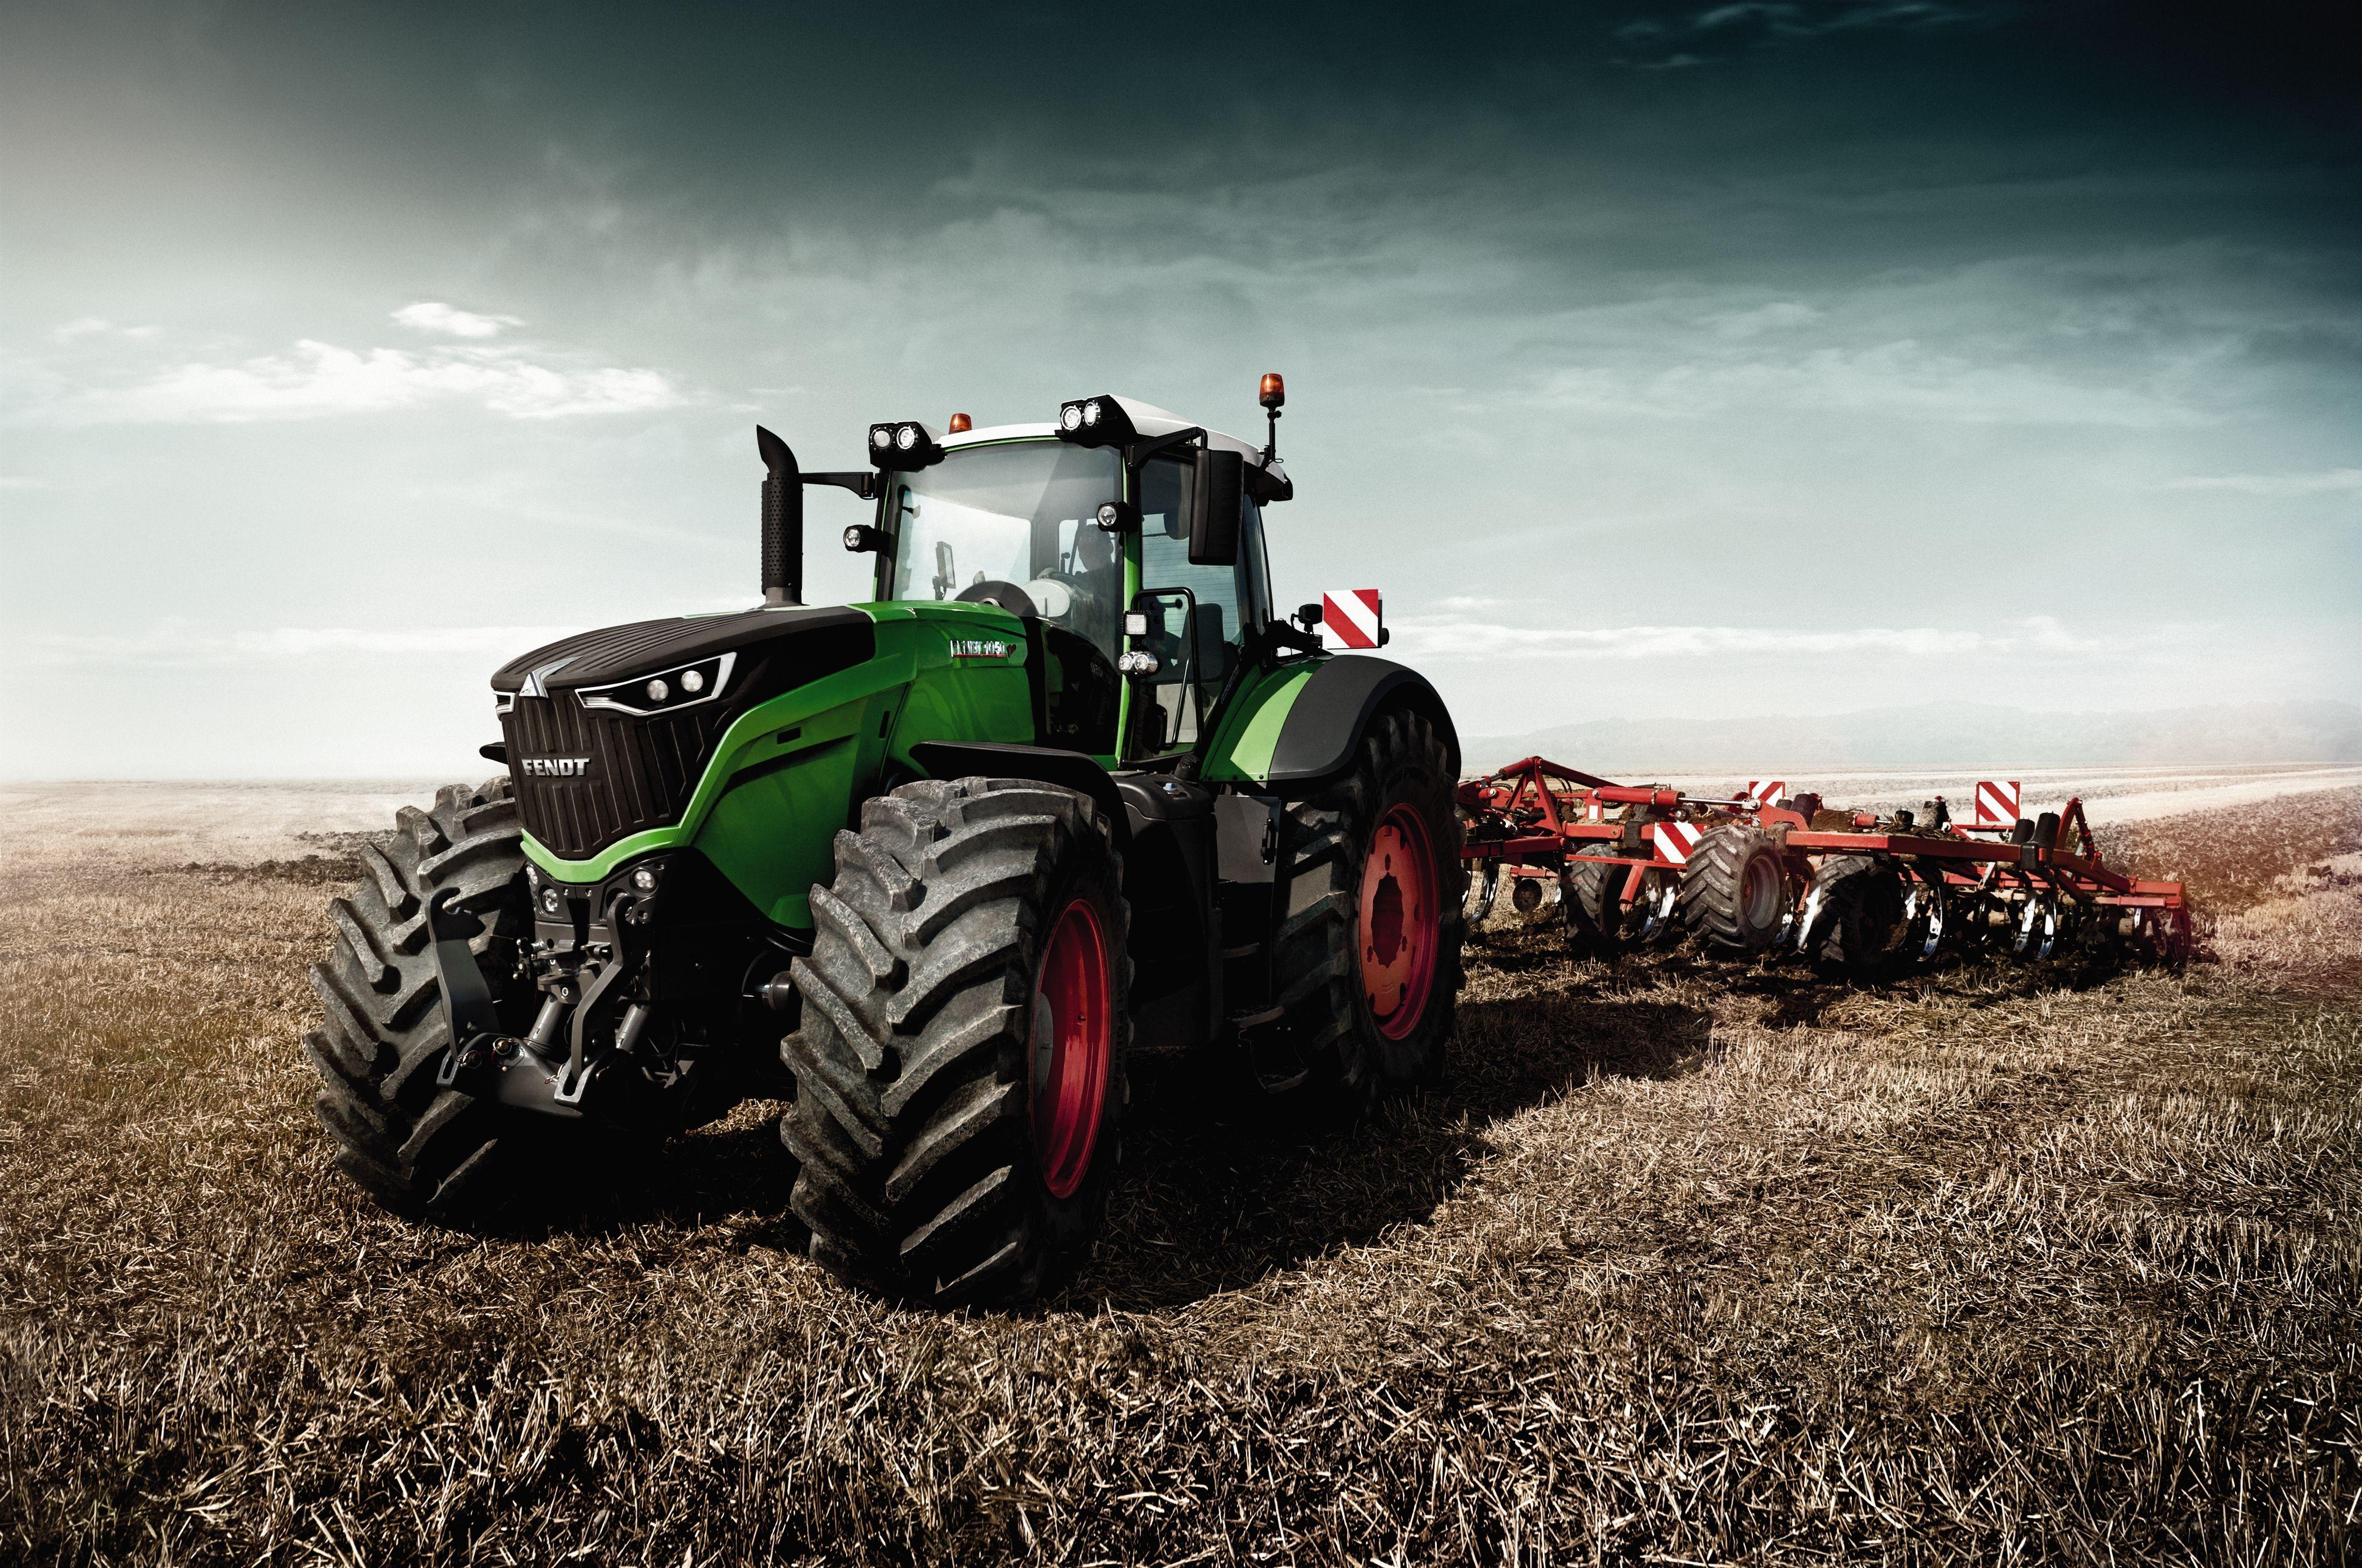 Fendt Wallpaper | Wallpaper, Wallpaper gallery, Agriculture tractor